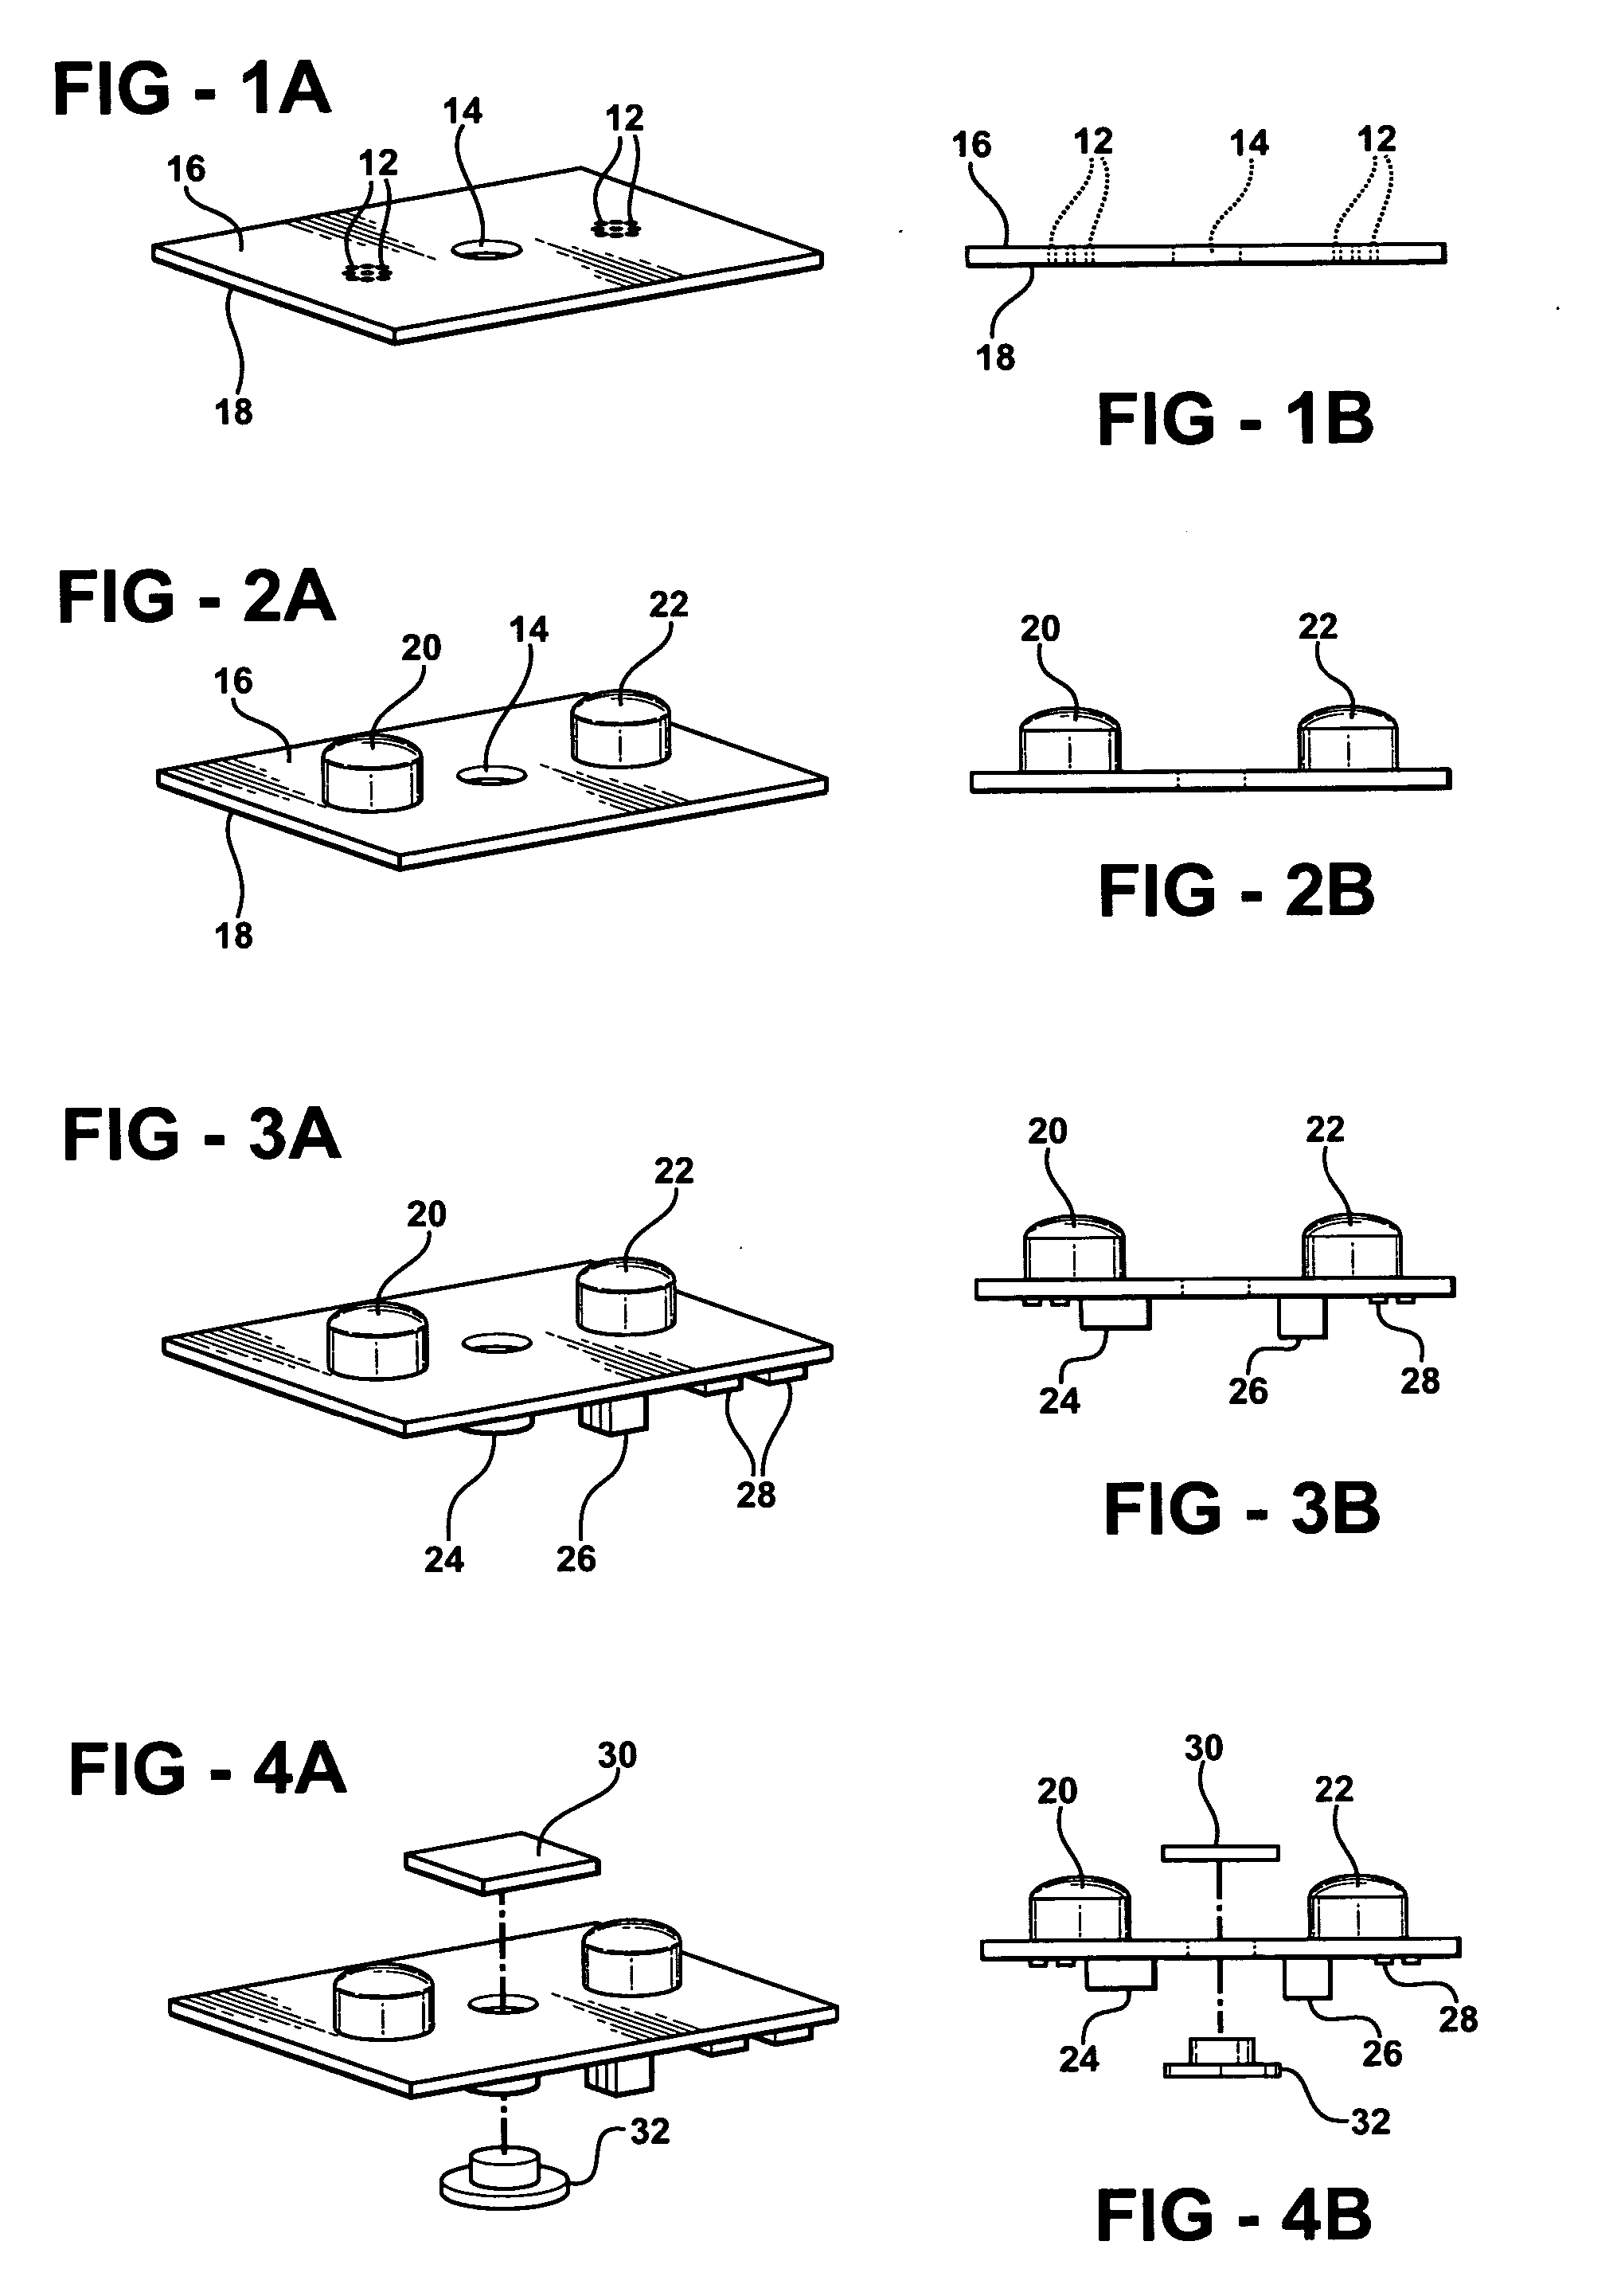 PCB board incorporating thermo-encapsulant for providing controlled heat dissipation and electromagnetic functions and associated method of manufacturing a PCB board